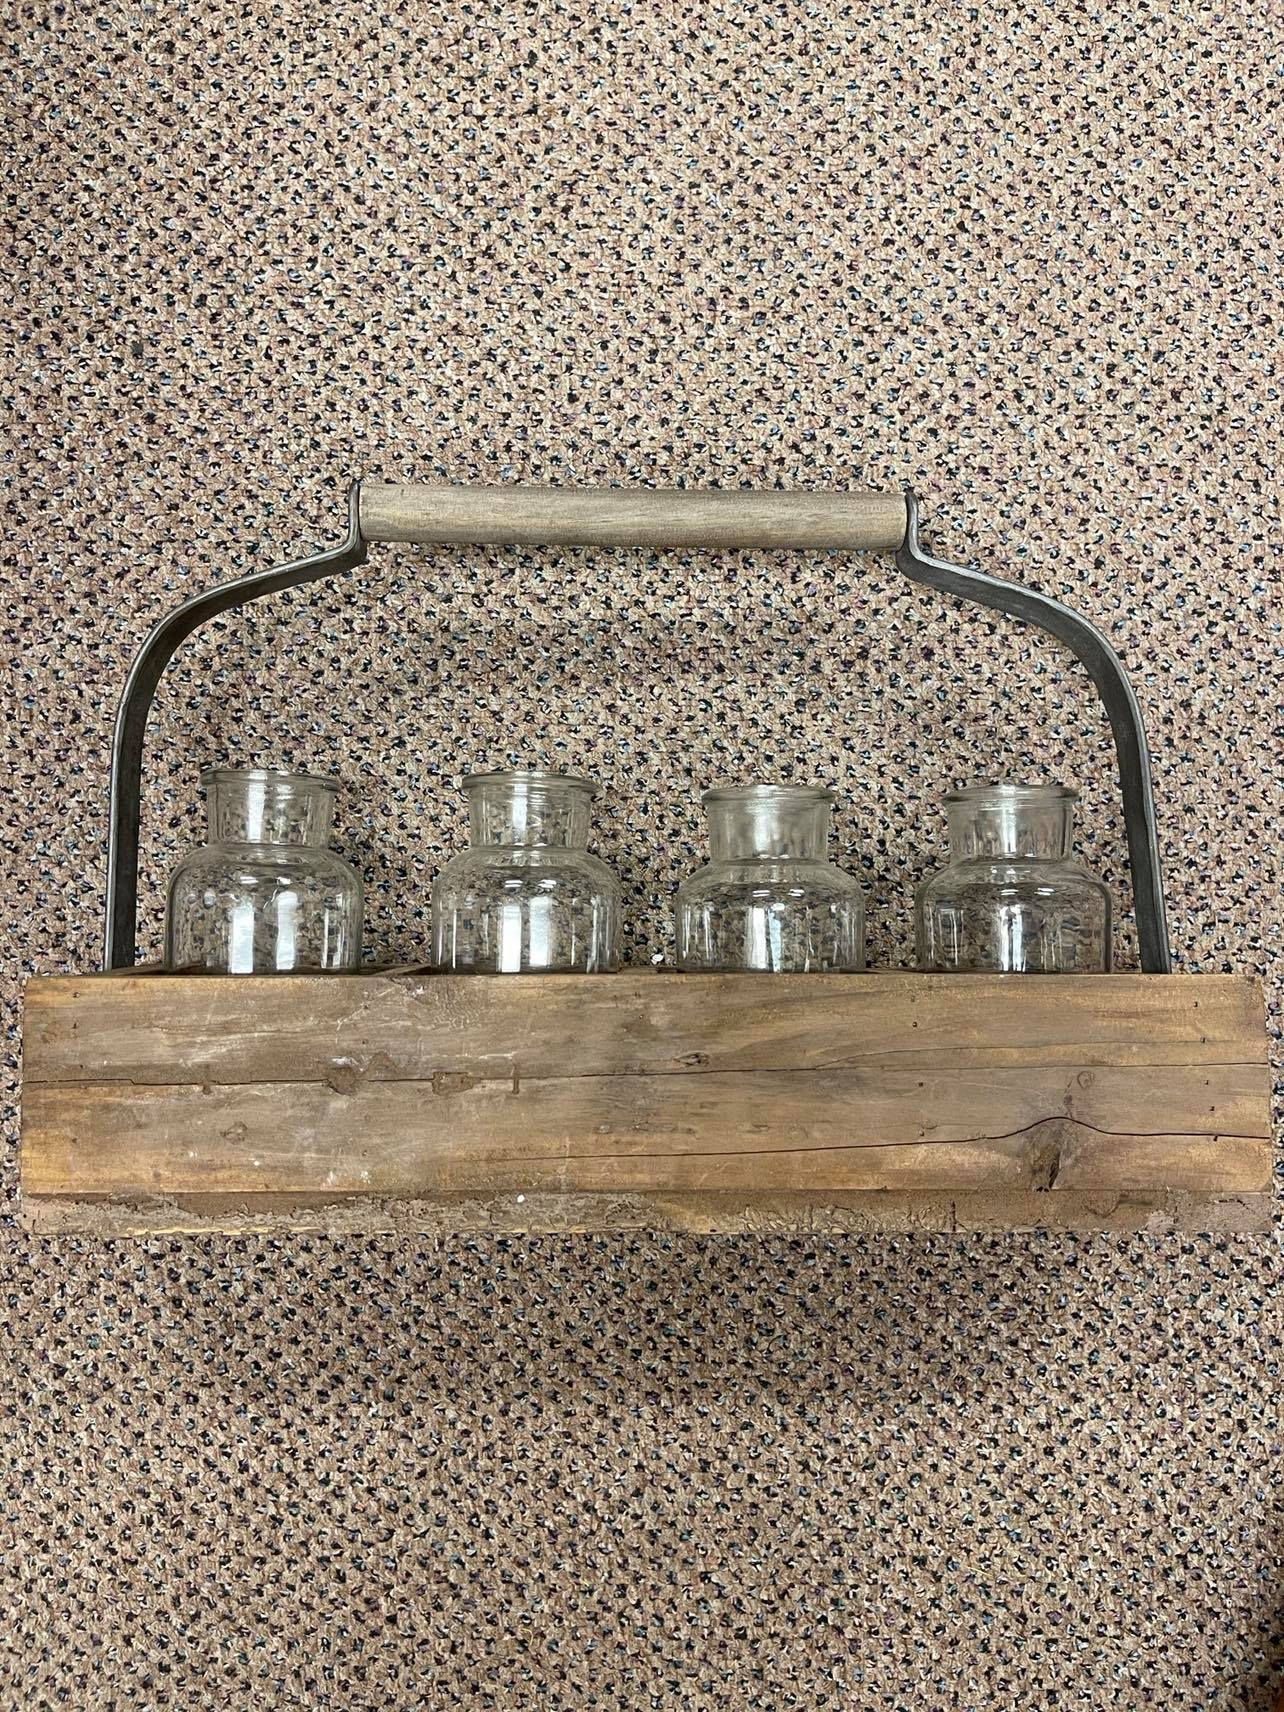 Wooden tote with glass jars